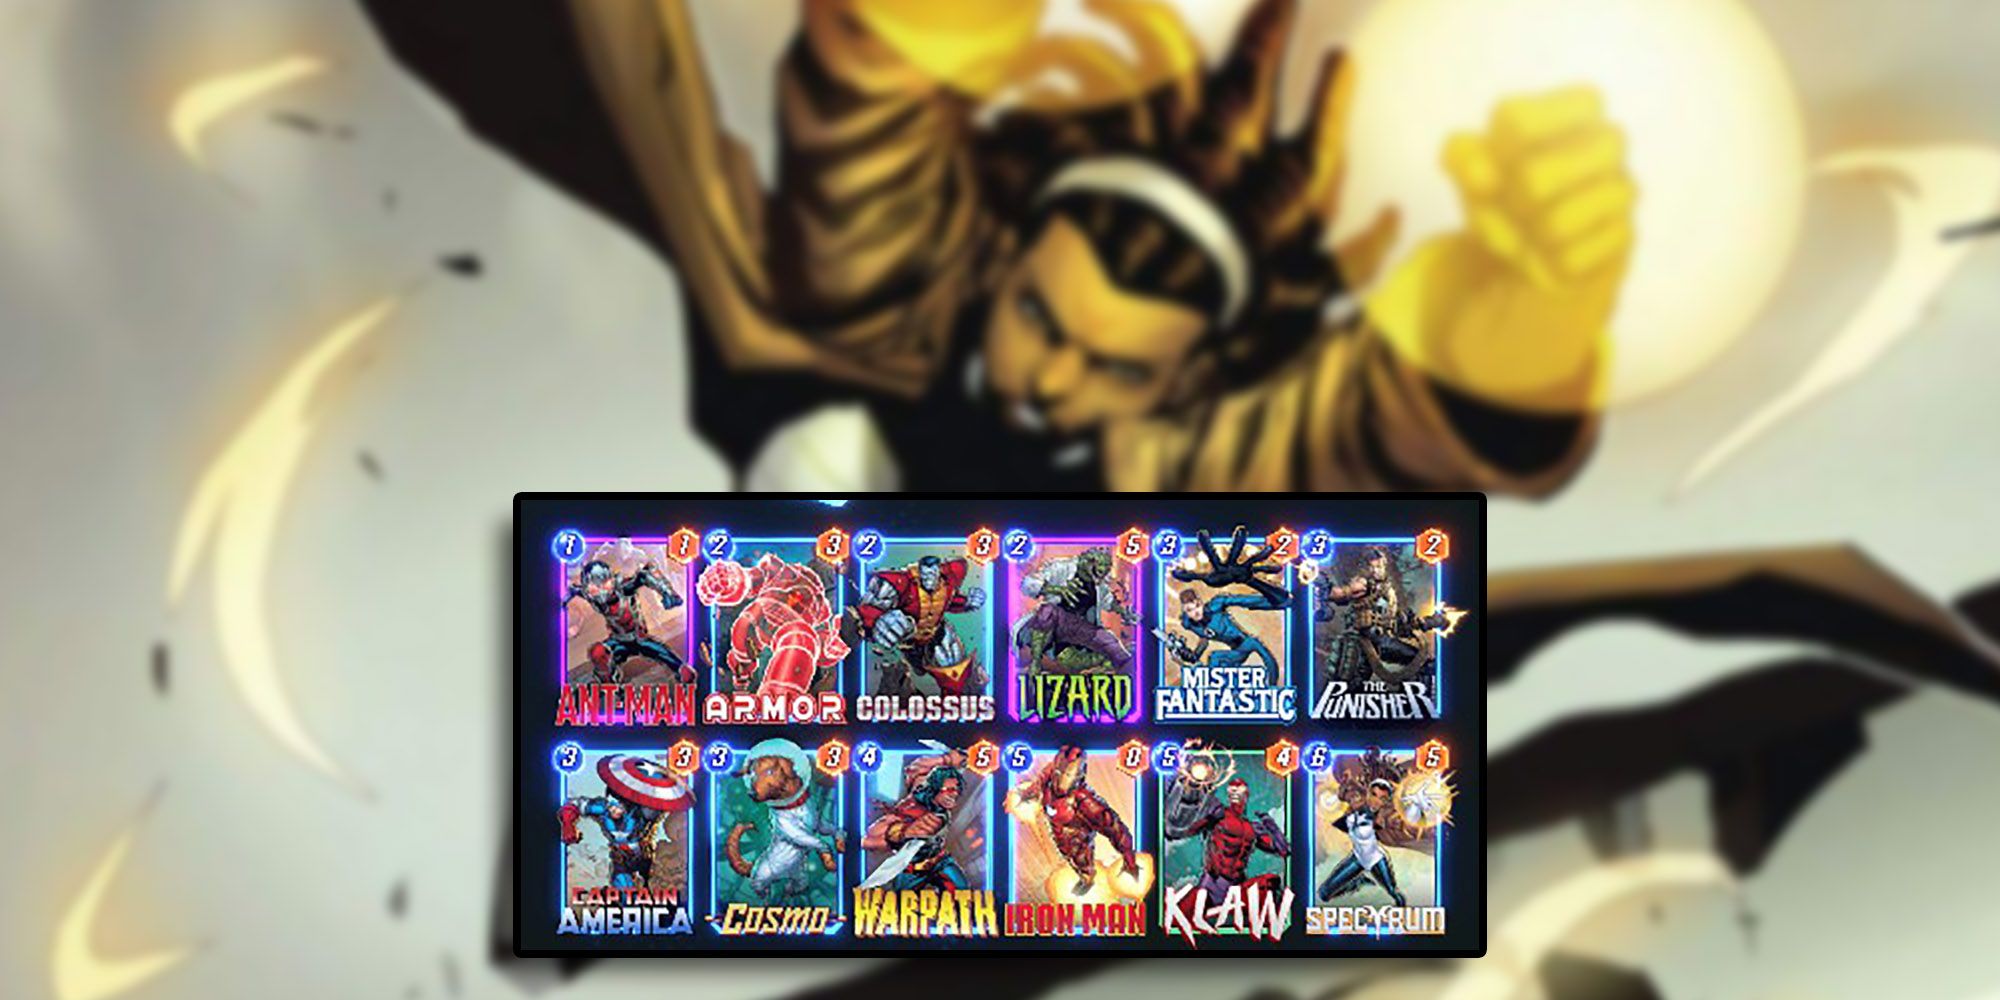 Marvel Snap - All Cards In Spectrum-Based Deck With Image Of Spectrum In Background